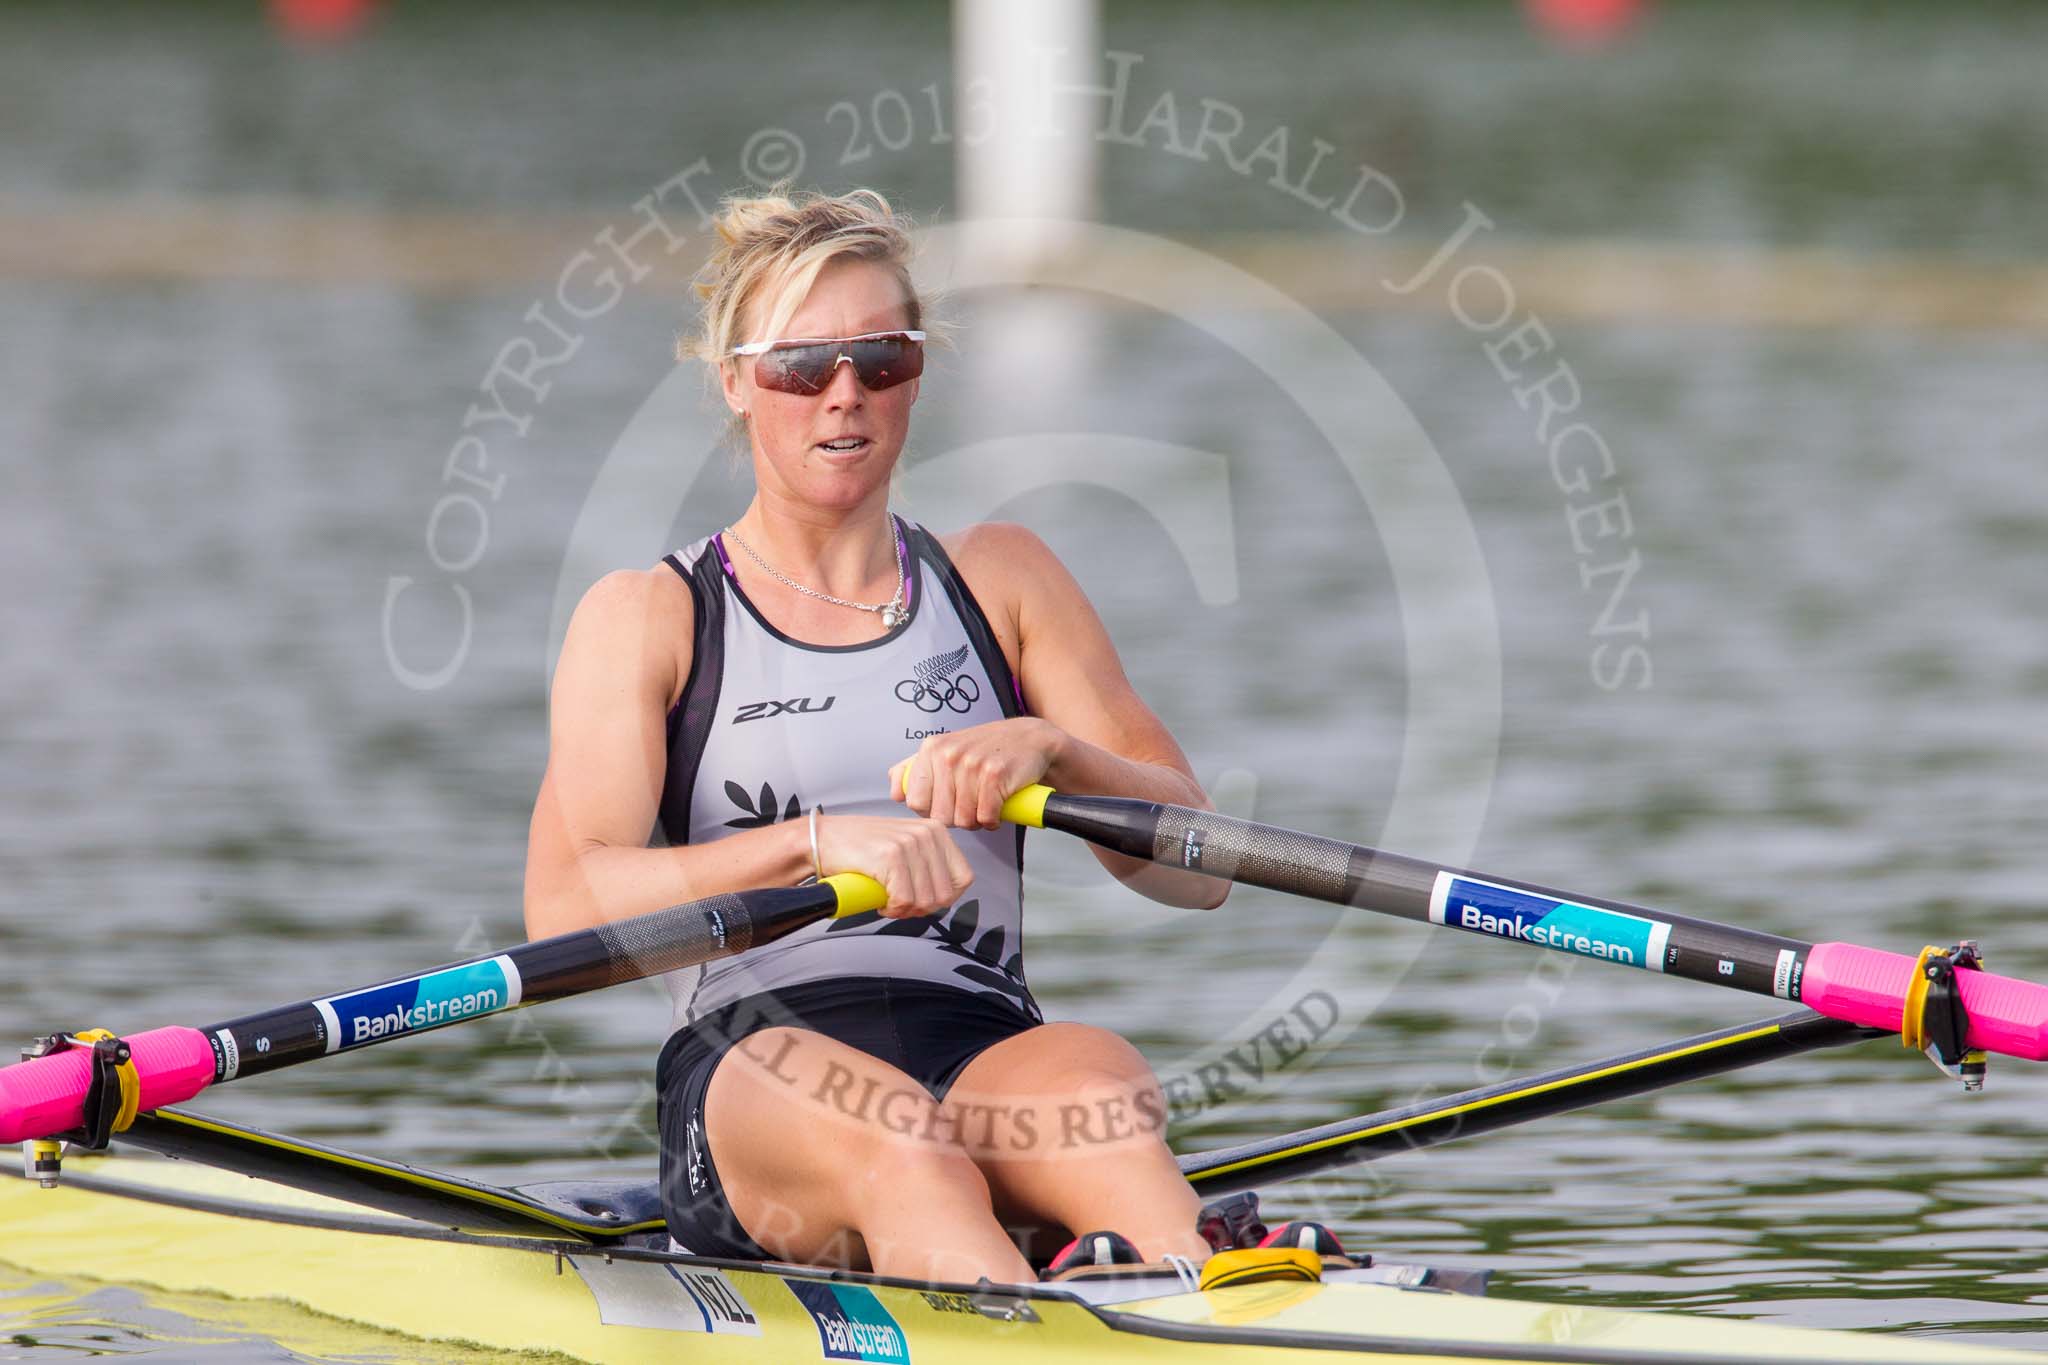 Henley Royal Regatta 2013, Saturday: Emma Twigg (Waiariki Rowing Club, New Zealand), 4th in Women's Single Sculls at the 2012 London Olympics, during a training session in the morning. Image #12, 06 July 2013 08:39 River Thames, Henley on Thames, UK